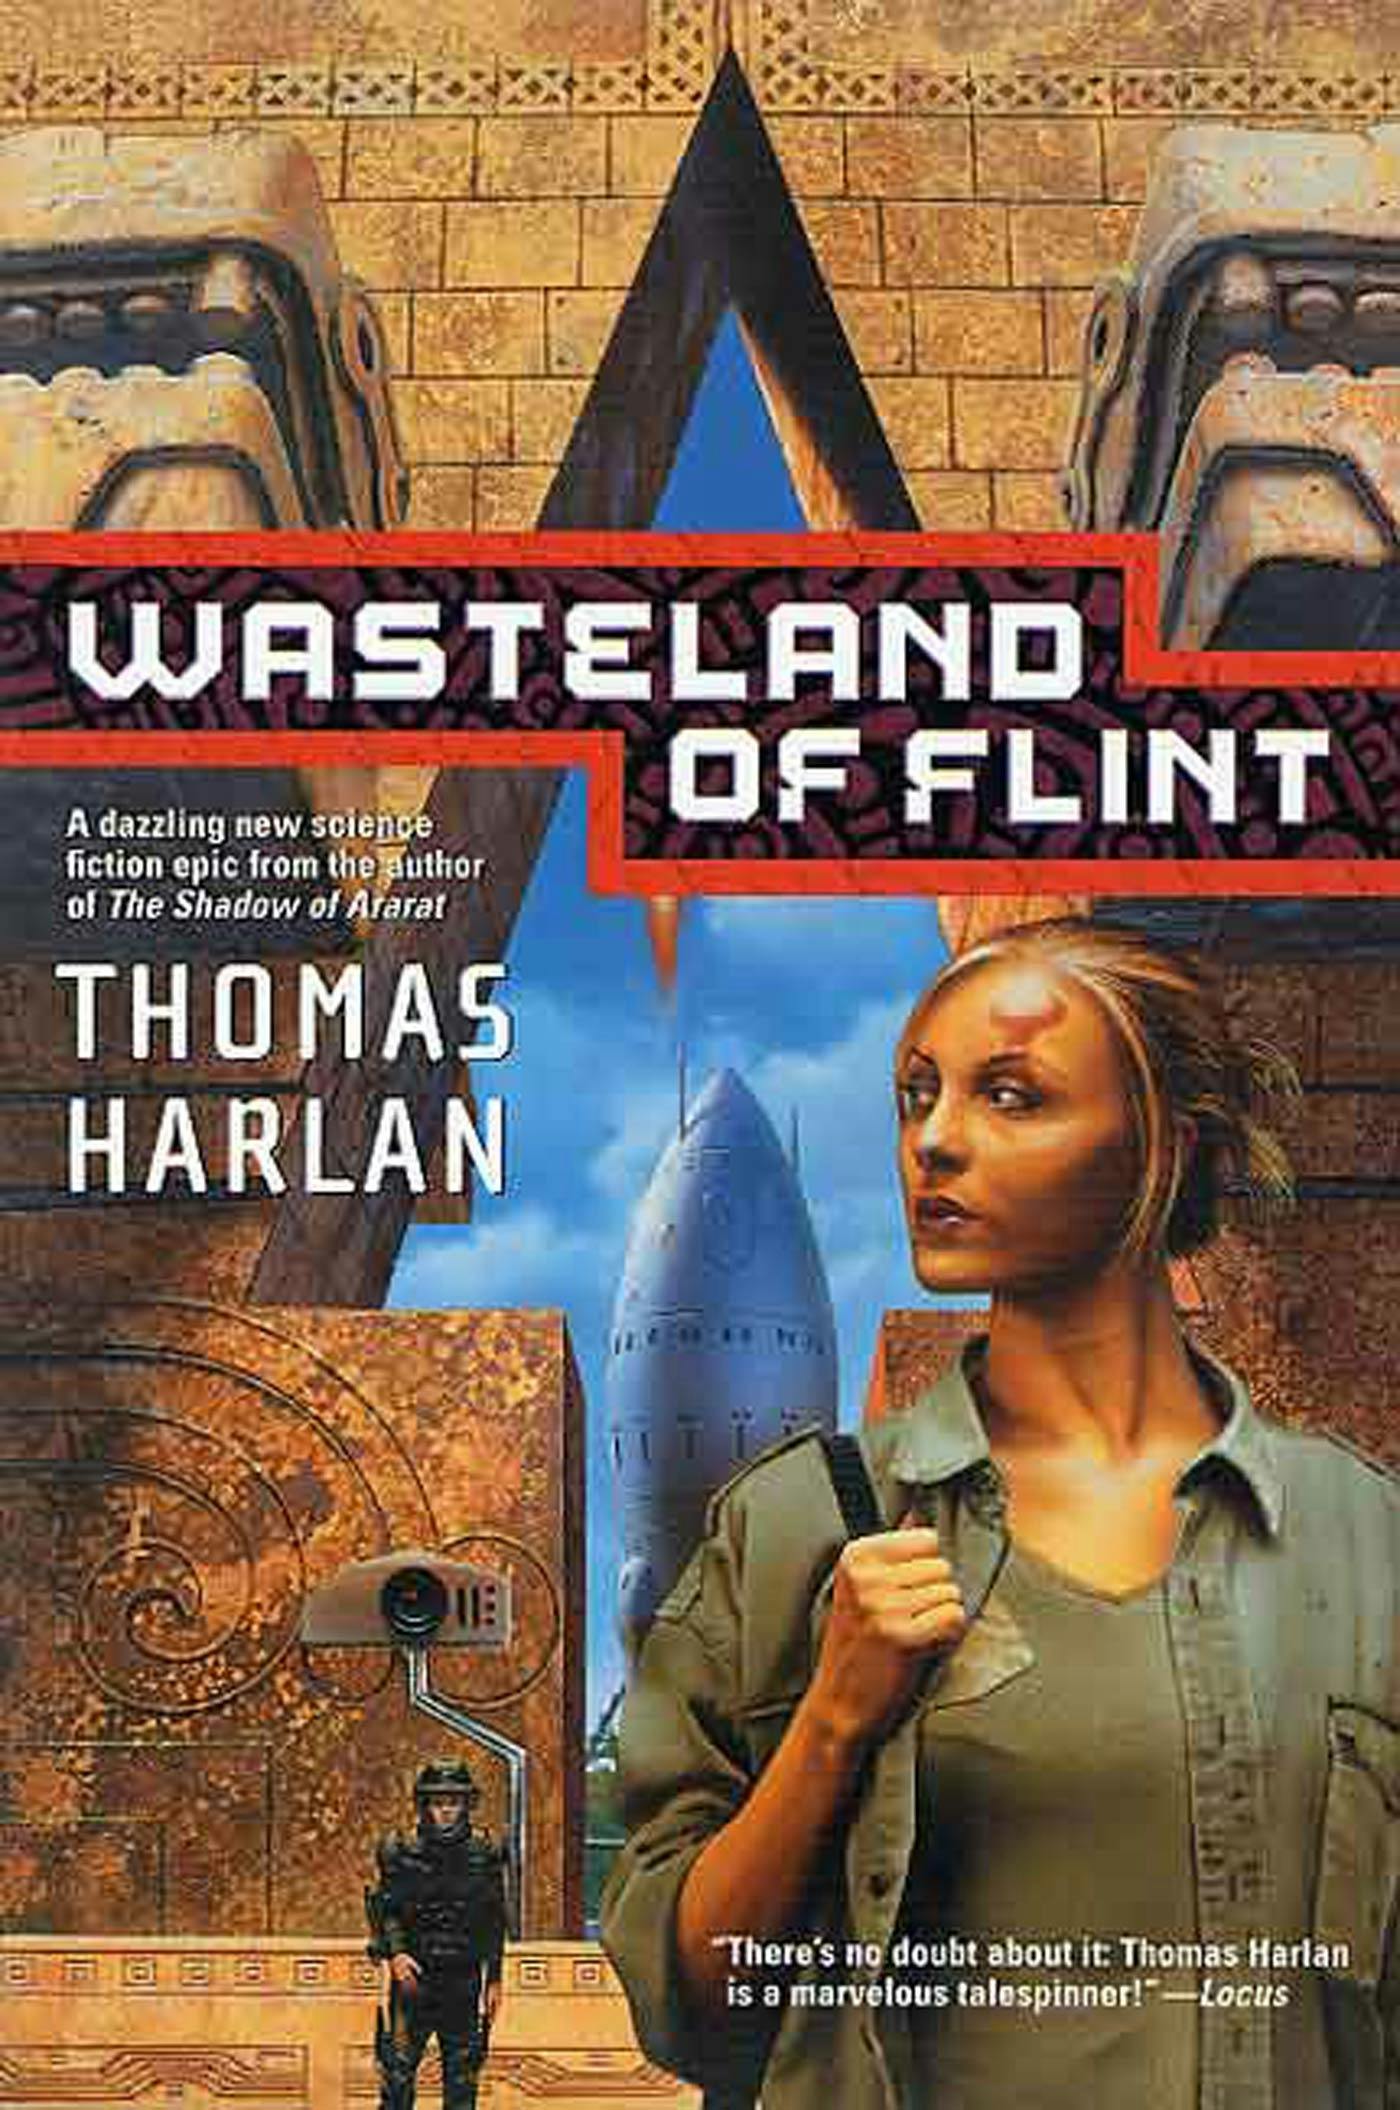 Cover for the book titled as: Wasteland of Flint